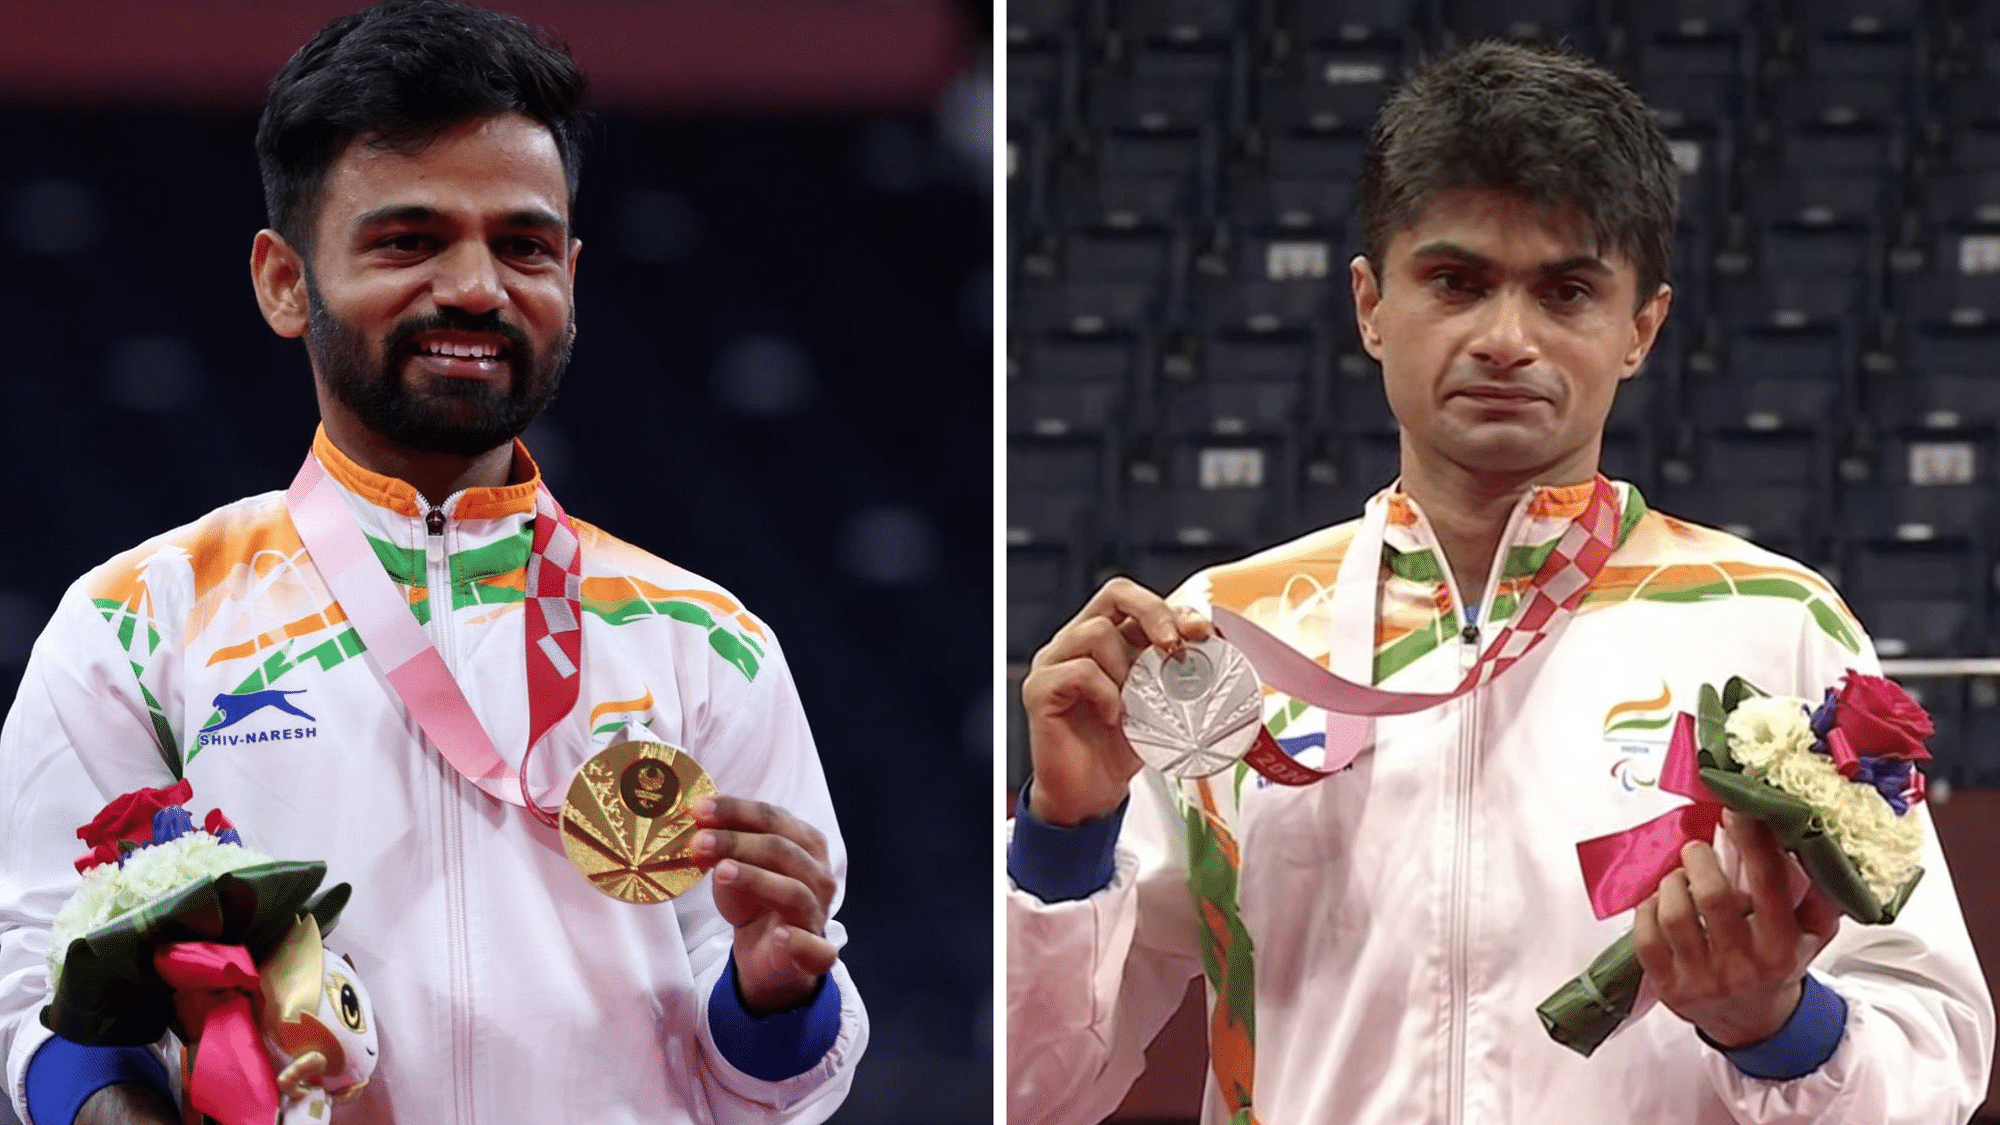 <div class="paragraphs"><p>Krishna Nagar and Suhas Yathiraj won medals for India on the final day of the 2020 Tokyo Paralympics.</p></div>